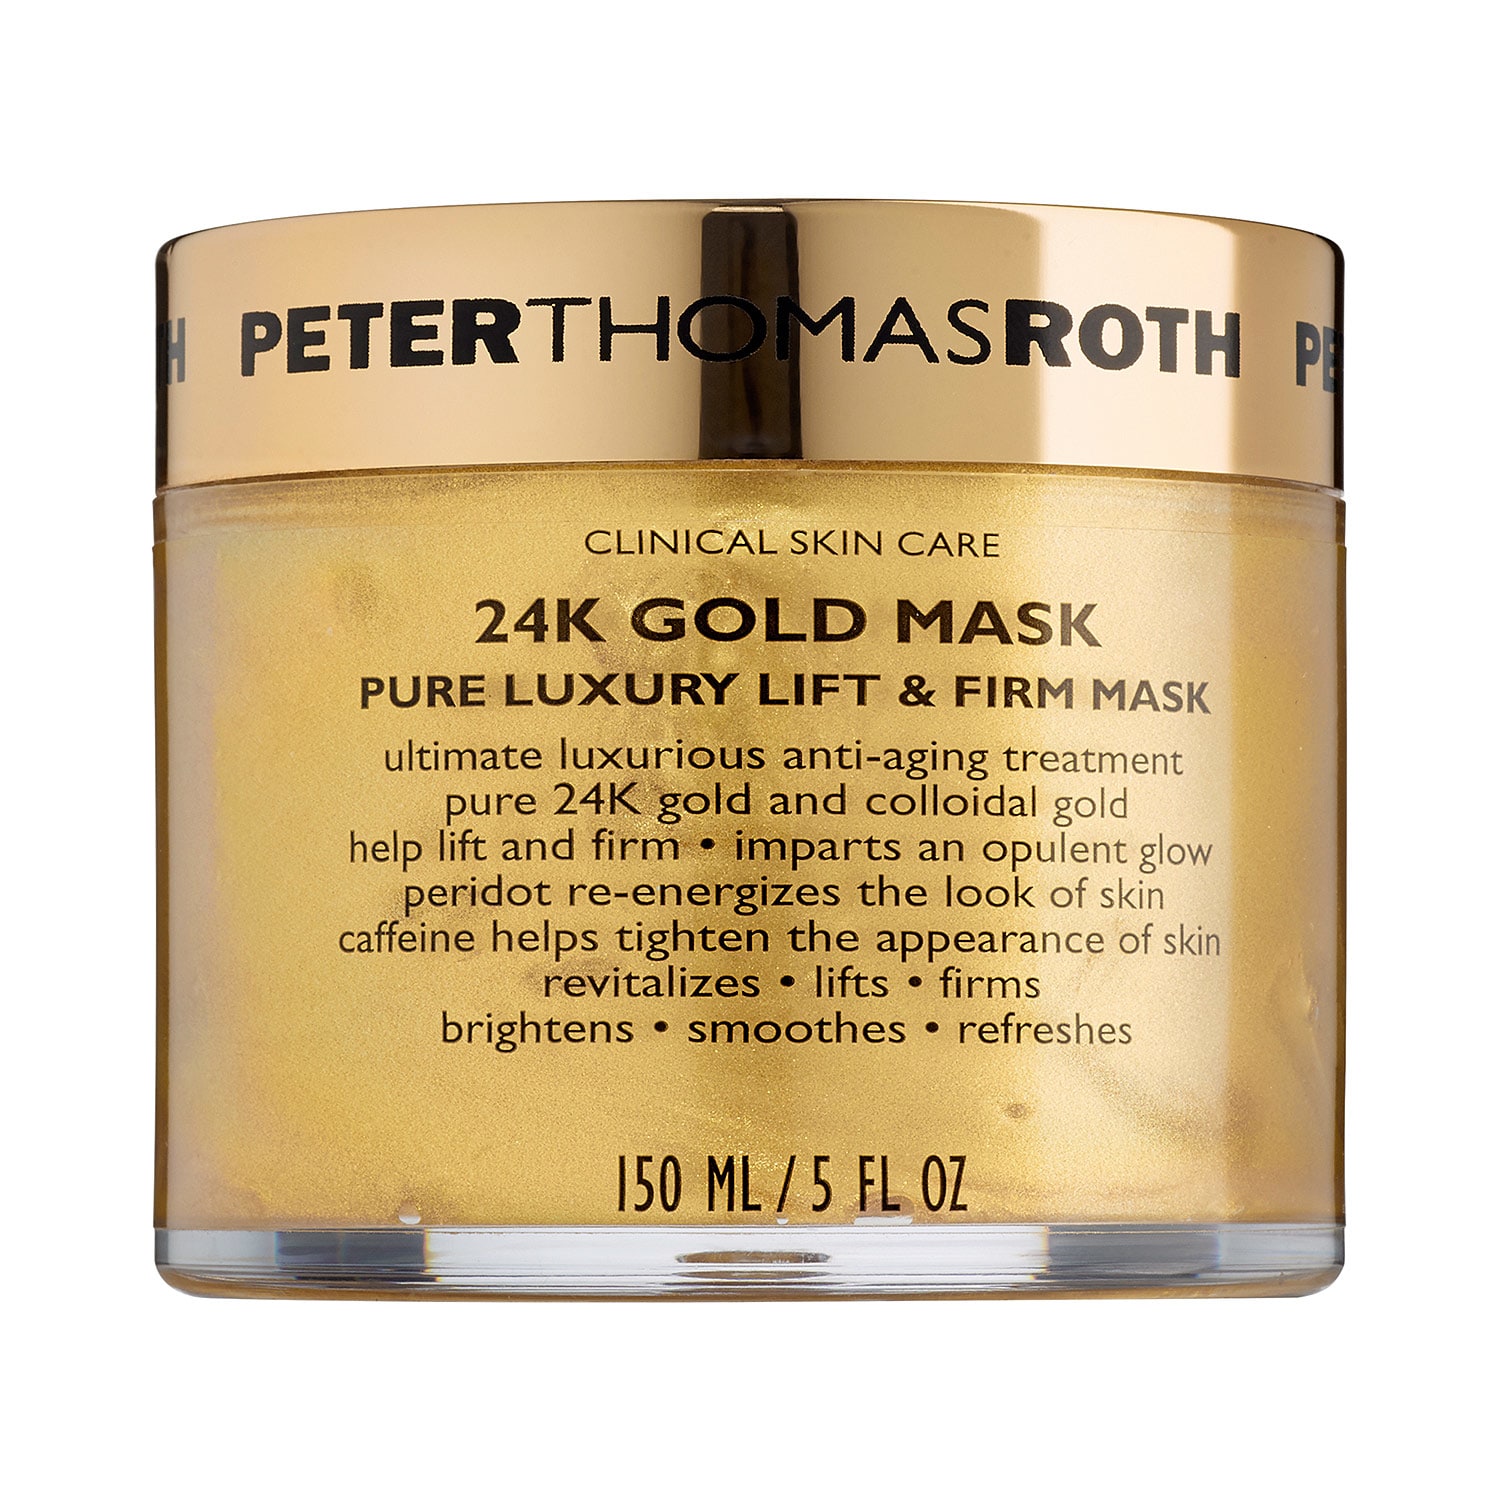 Pure luxury. Peter Thomas Roth — 24k Gold Mask Pure 50 мл. 24 K Gold Mask Pure Luxury Lift. Маска для лица Peter Thomas 24k Gold Mask (150 мл). Peter Thomas Roth маска для лица.